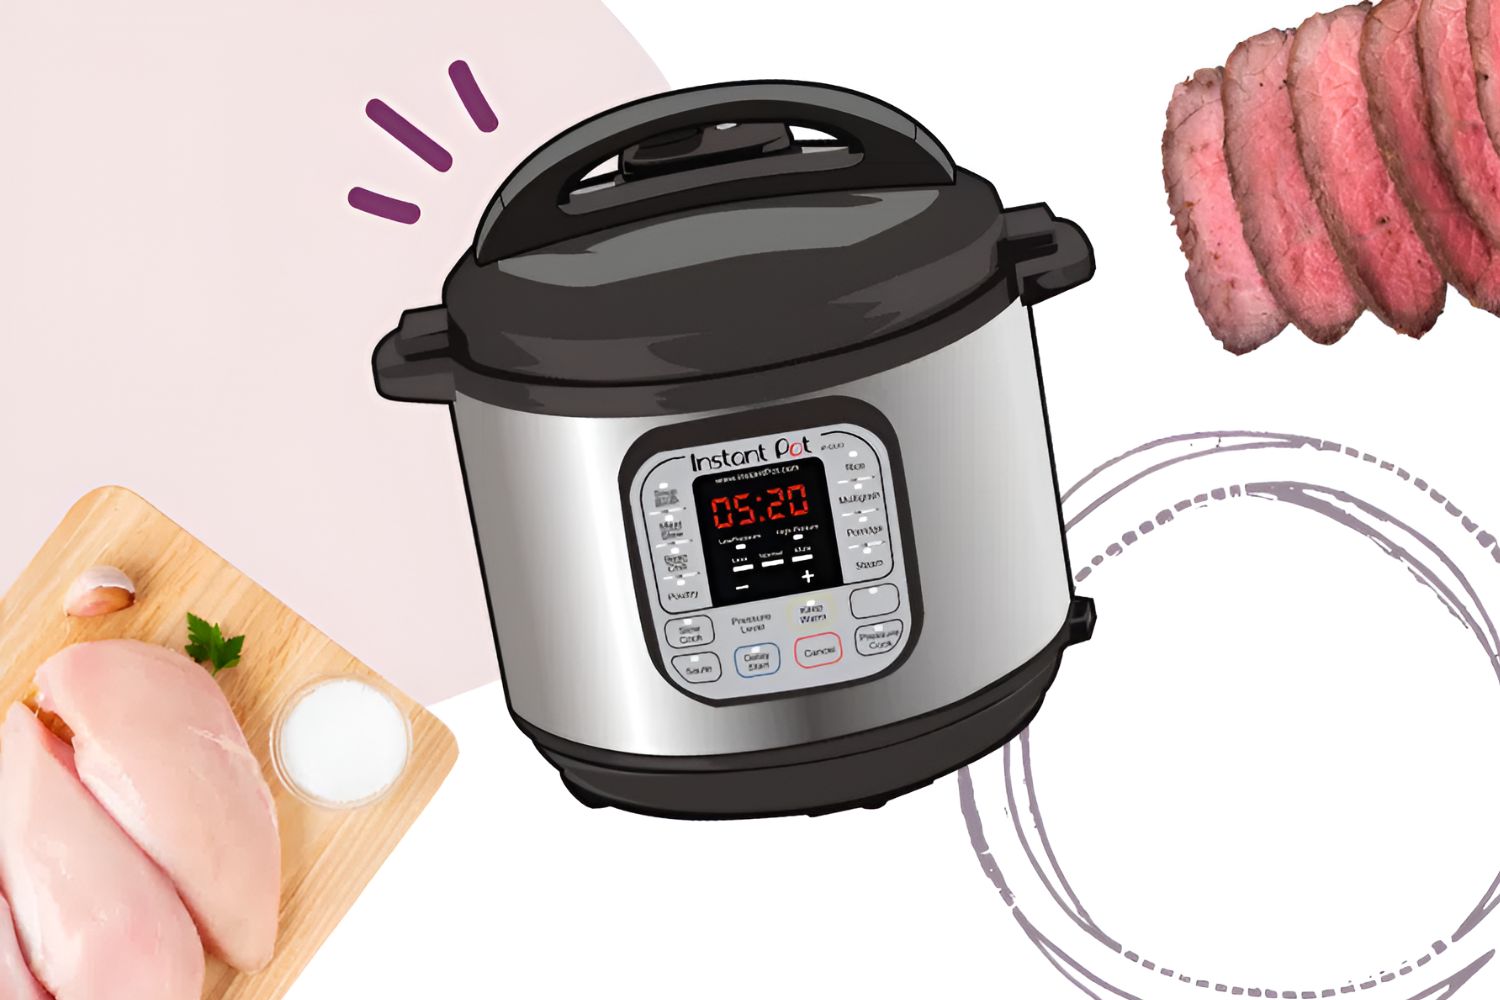 How To Make Meat In An Electric Pressure Cooker